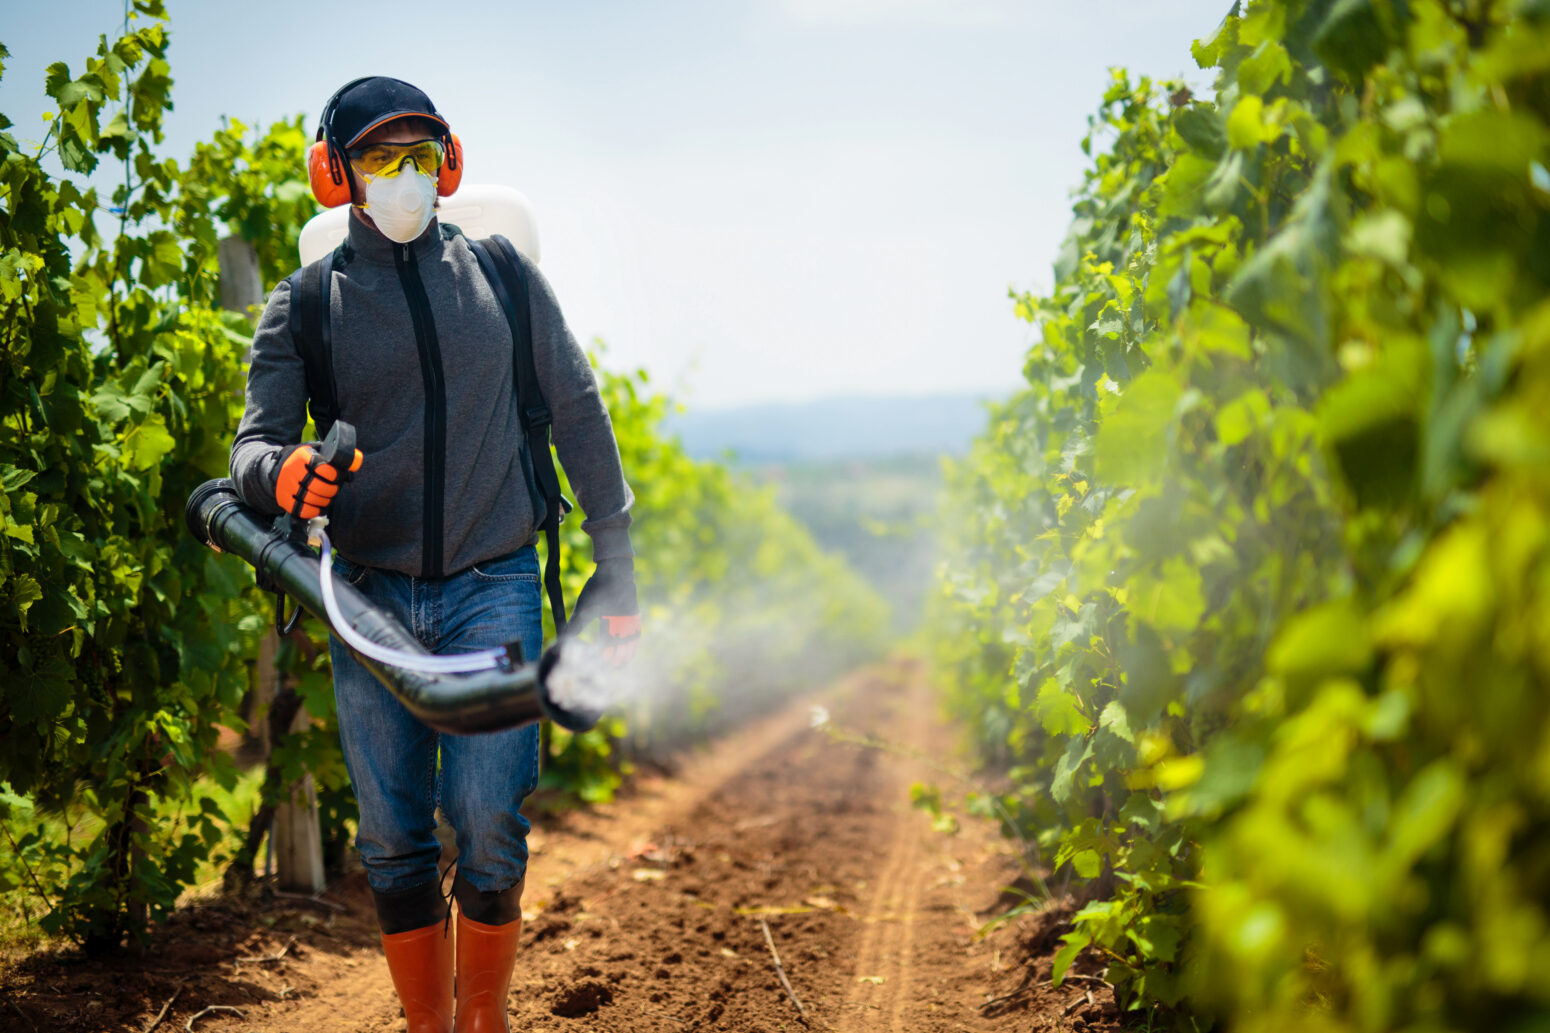 Have you been exposed to pesticides and feeling unwell – you may have an occupational disease